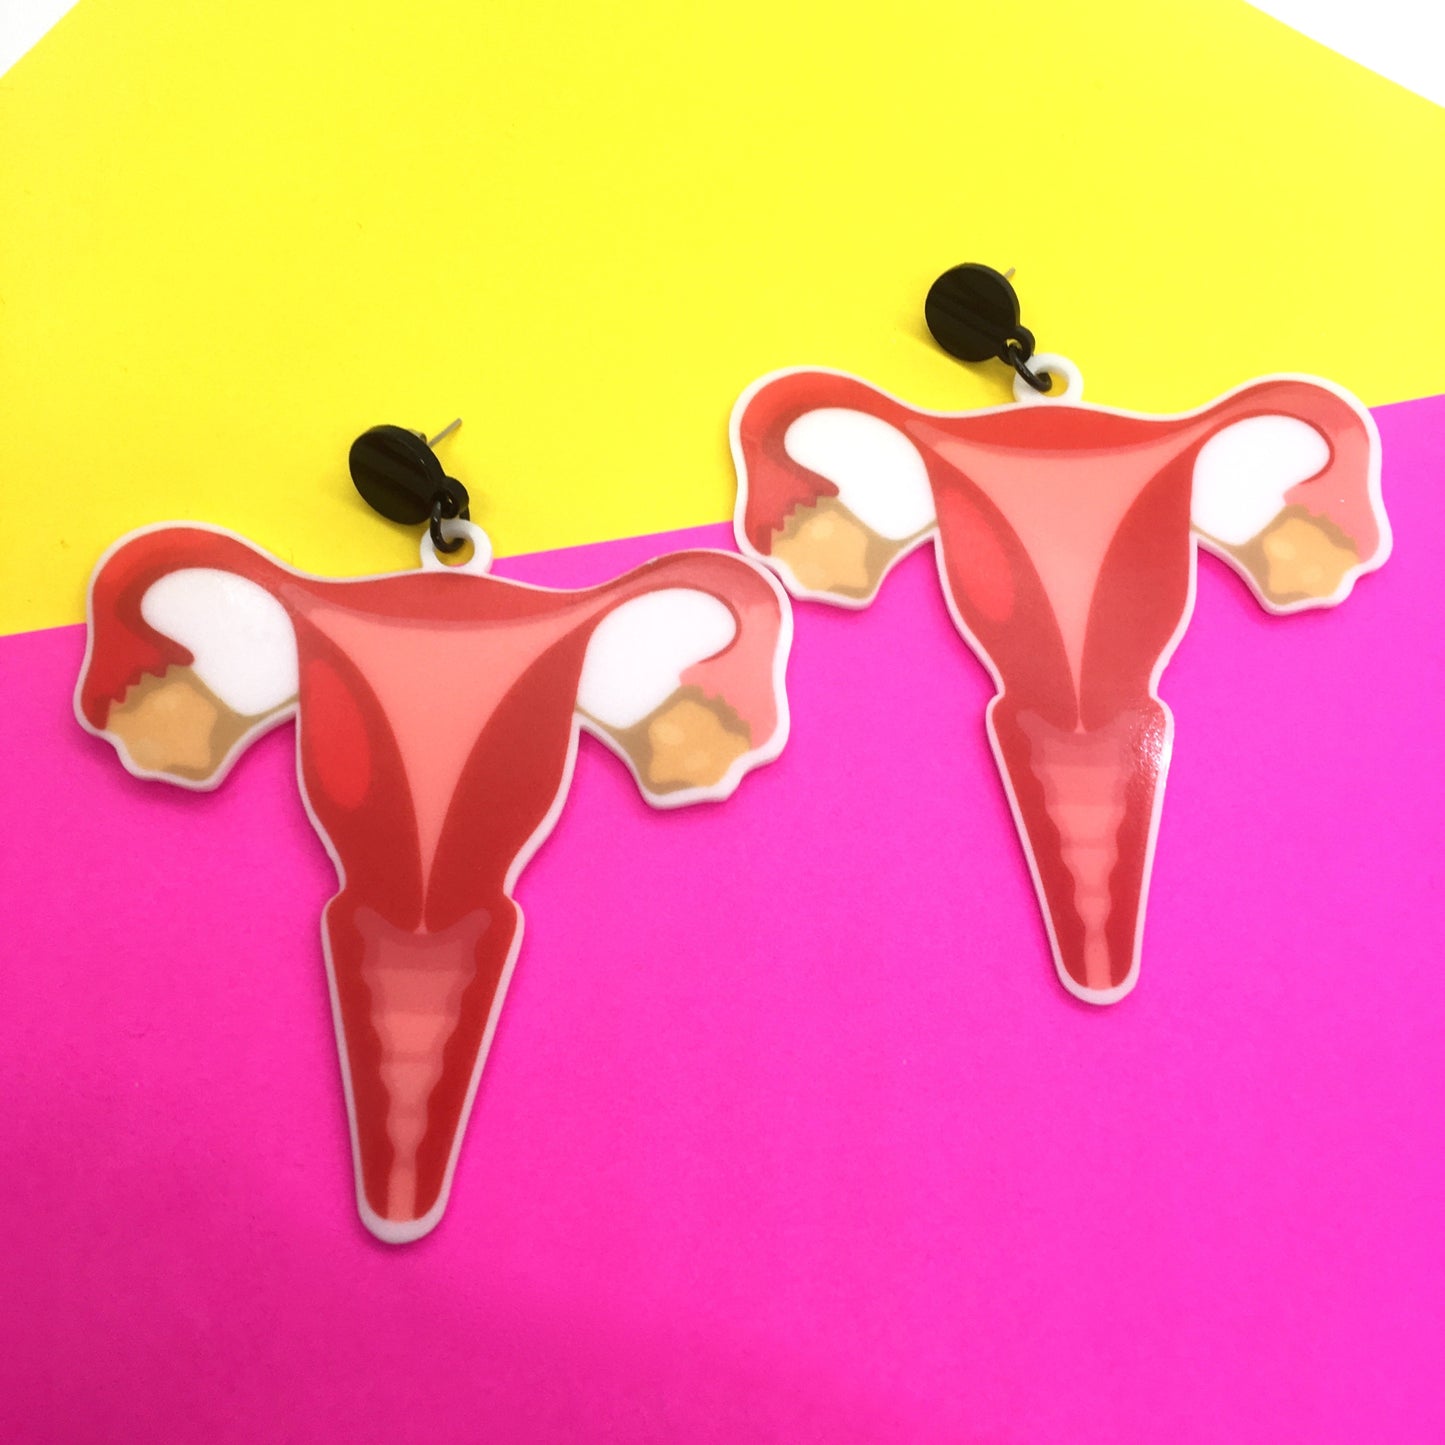 Uterus Necklace and Earrings